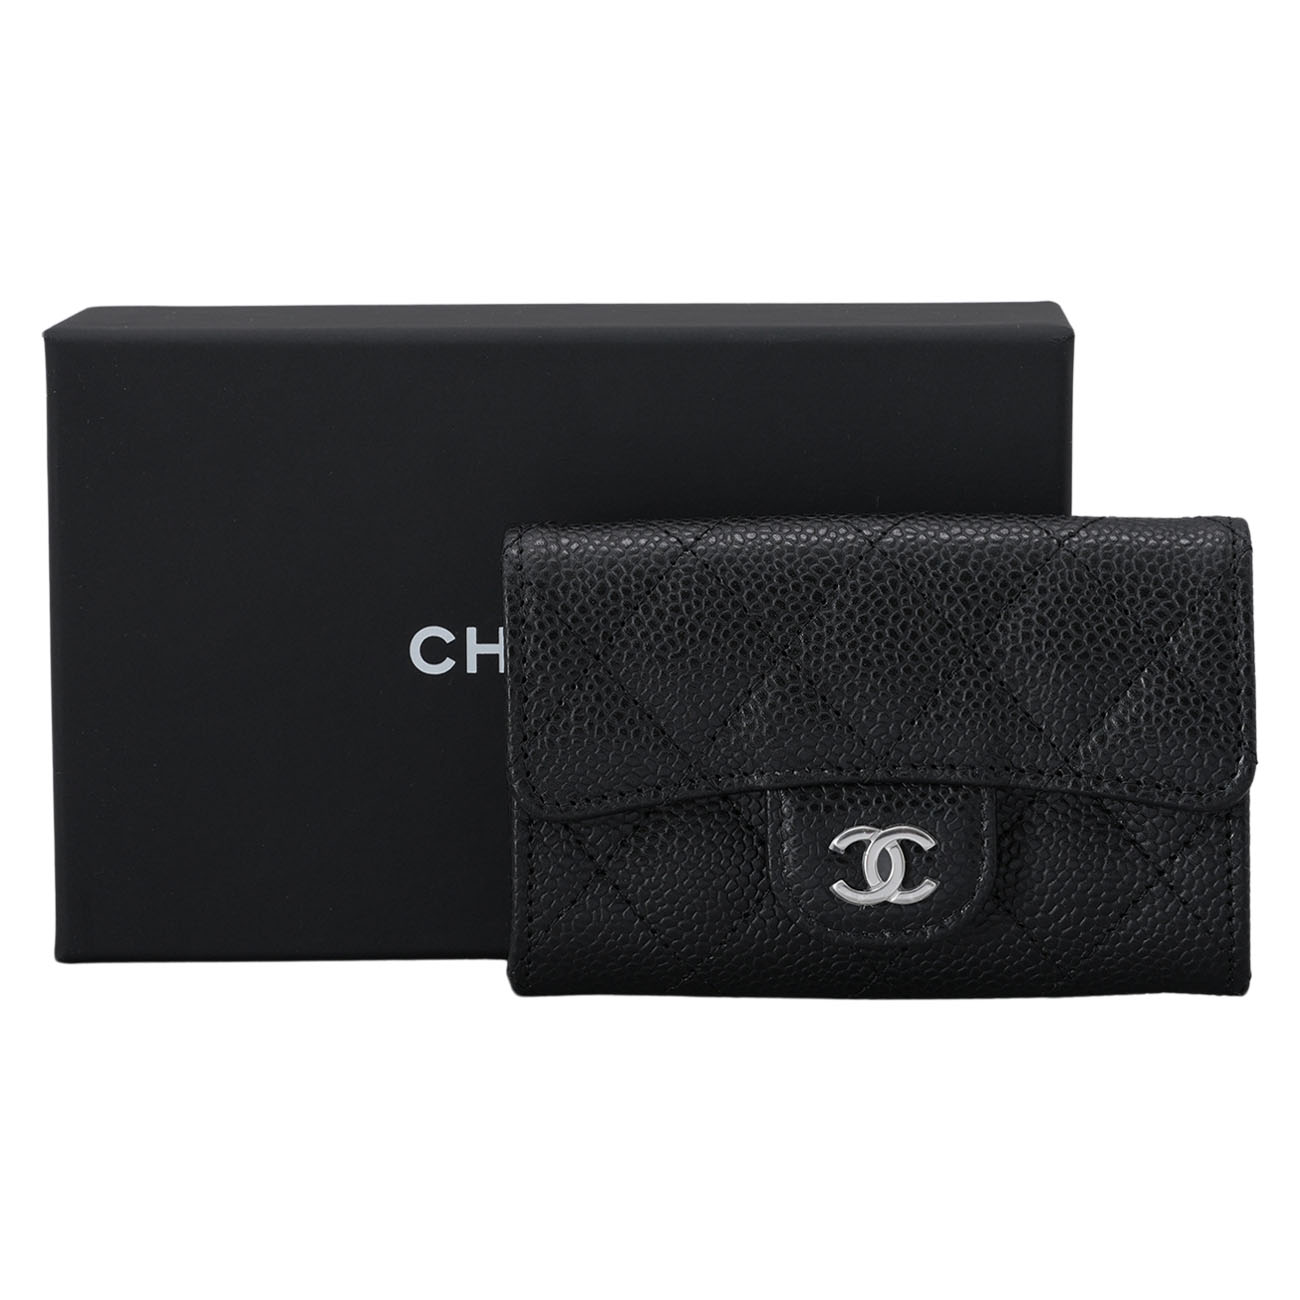 CHANEL(NEW)샤넬 캐비어 클래식 카드지갑 NEW PRODUCT